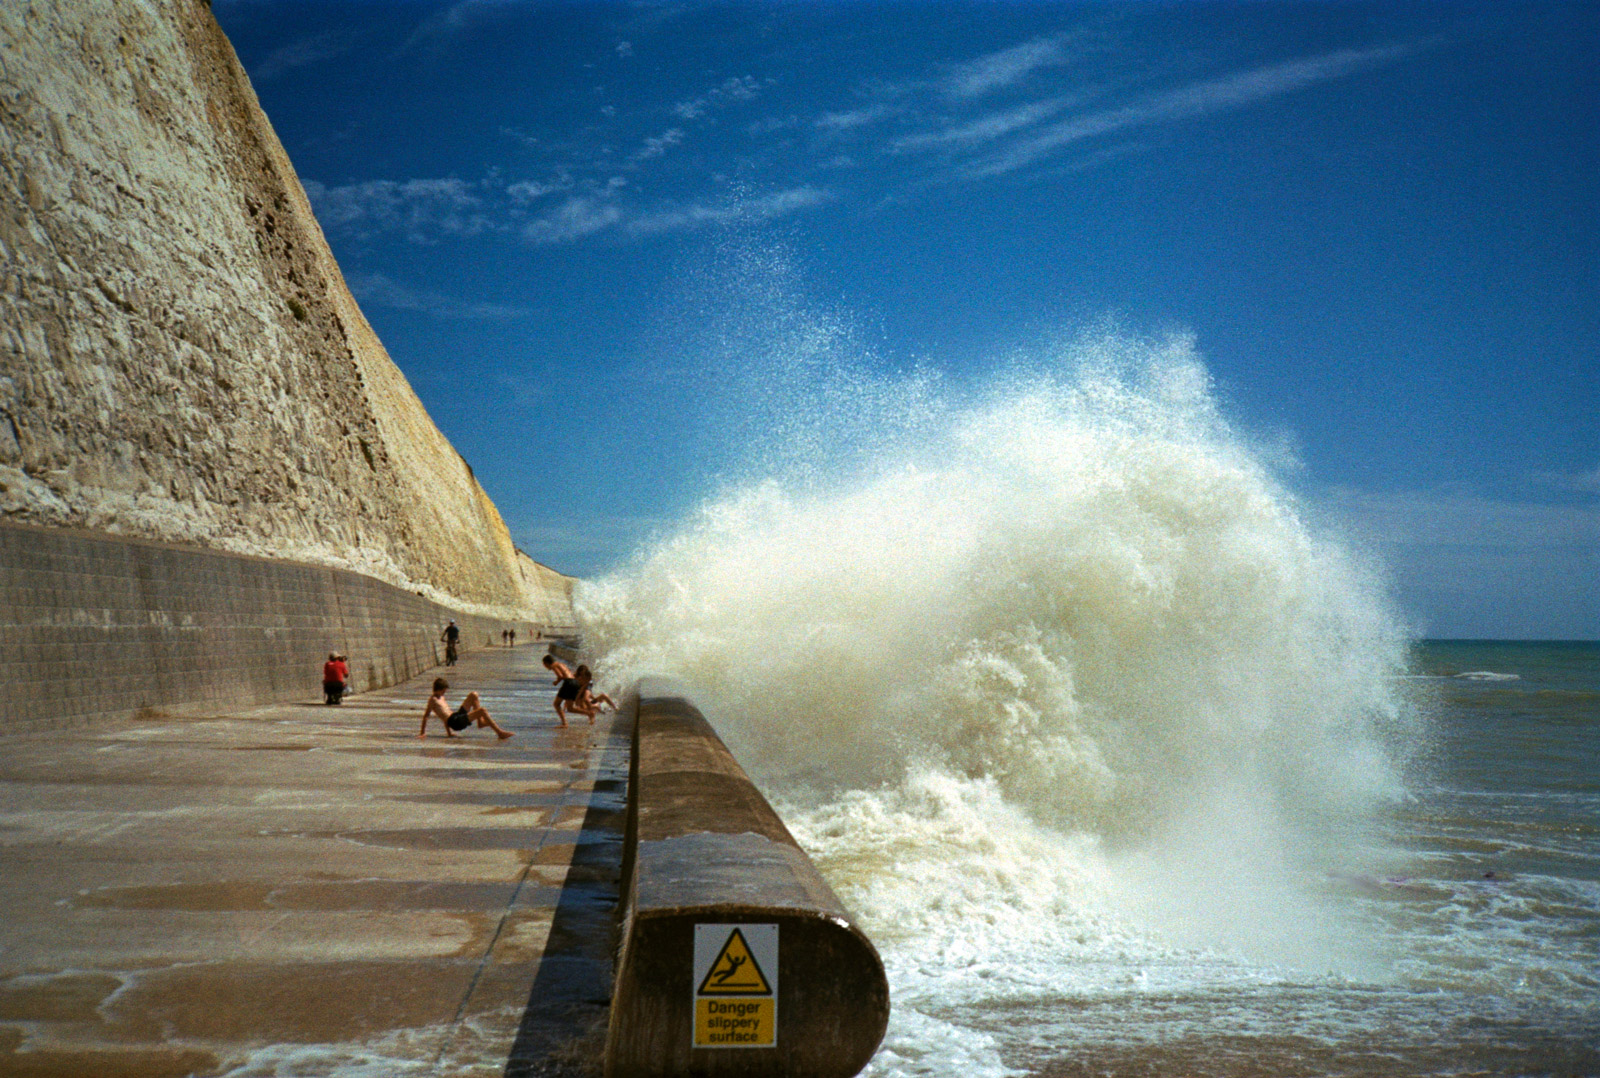 kids catching waves on Peacehaven Promenade, 35mm.